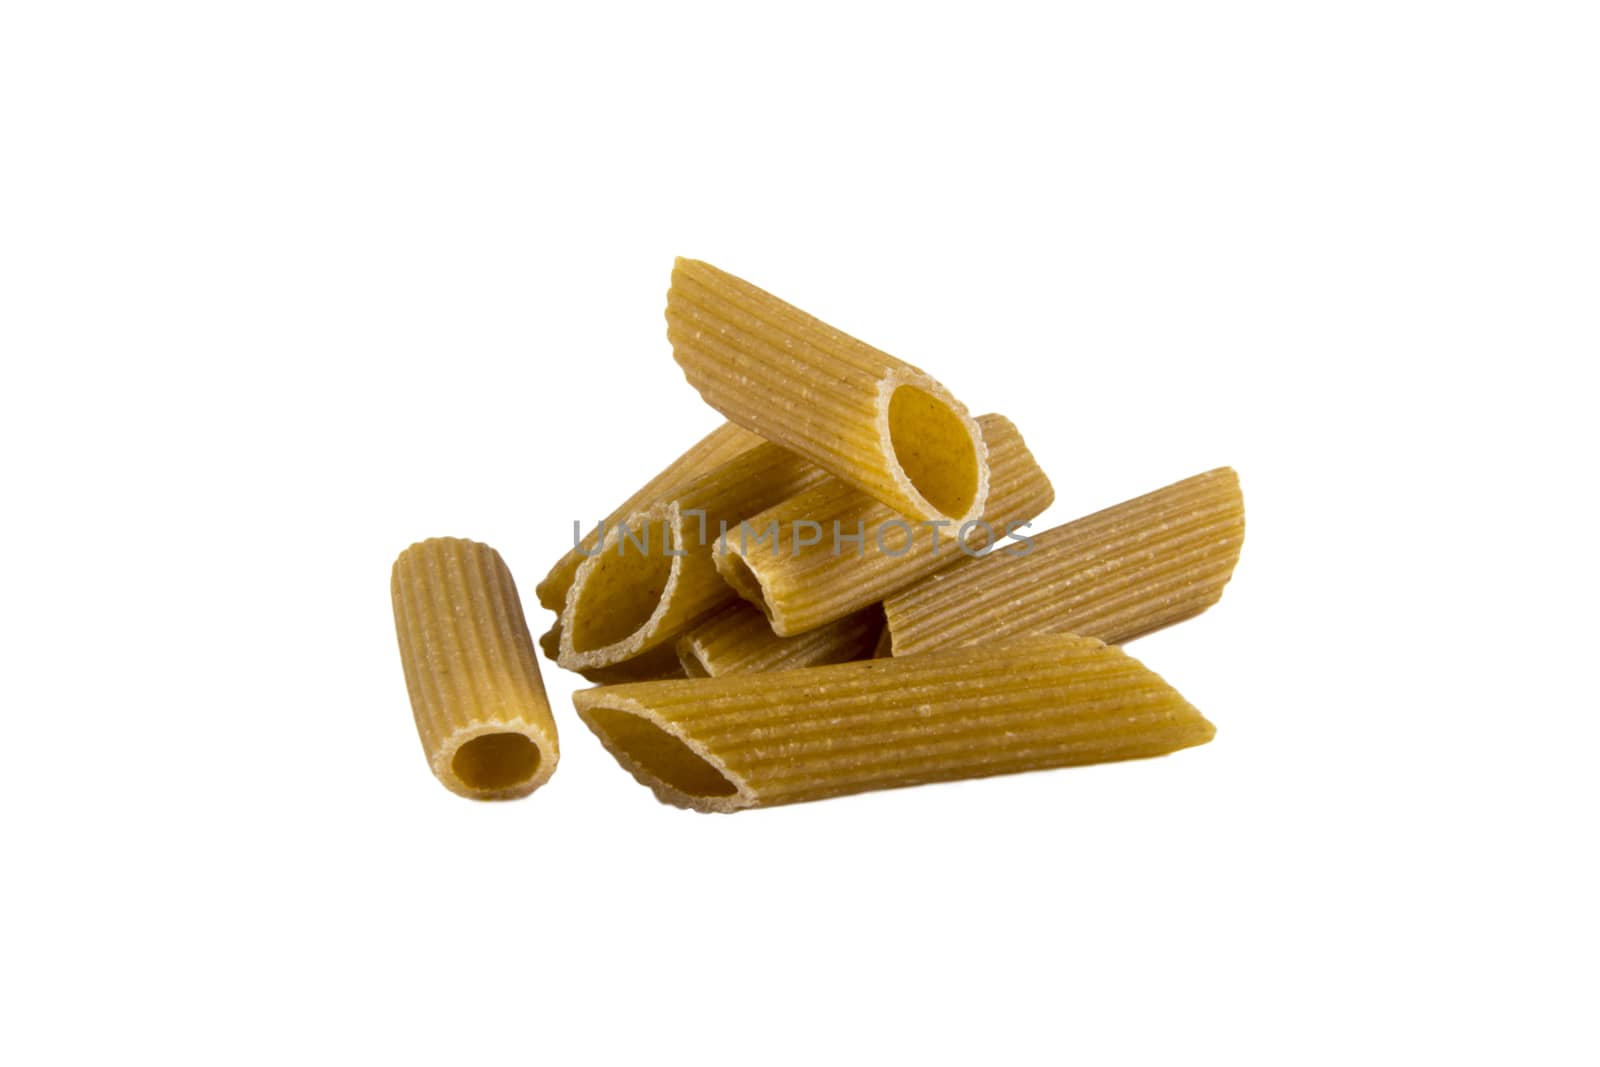  penne  pasta heap isolated on white background